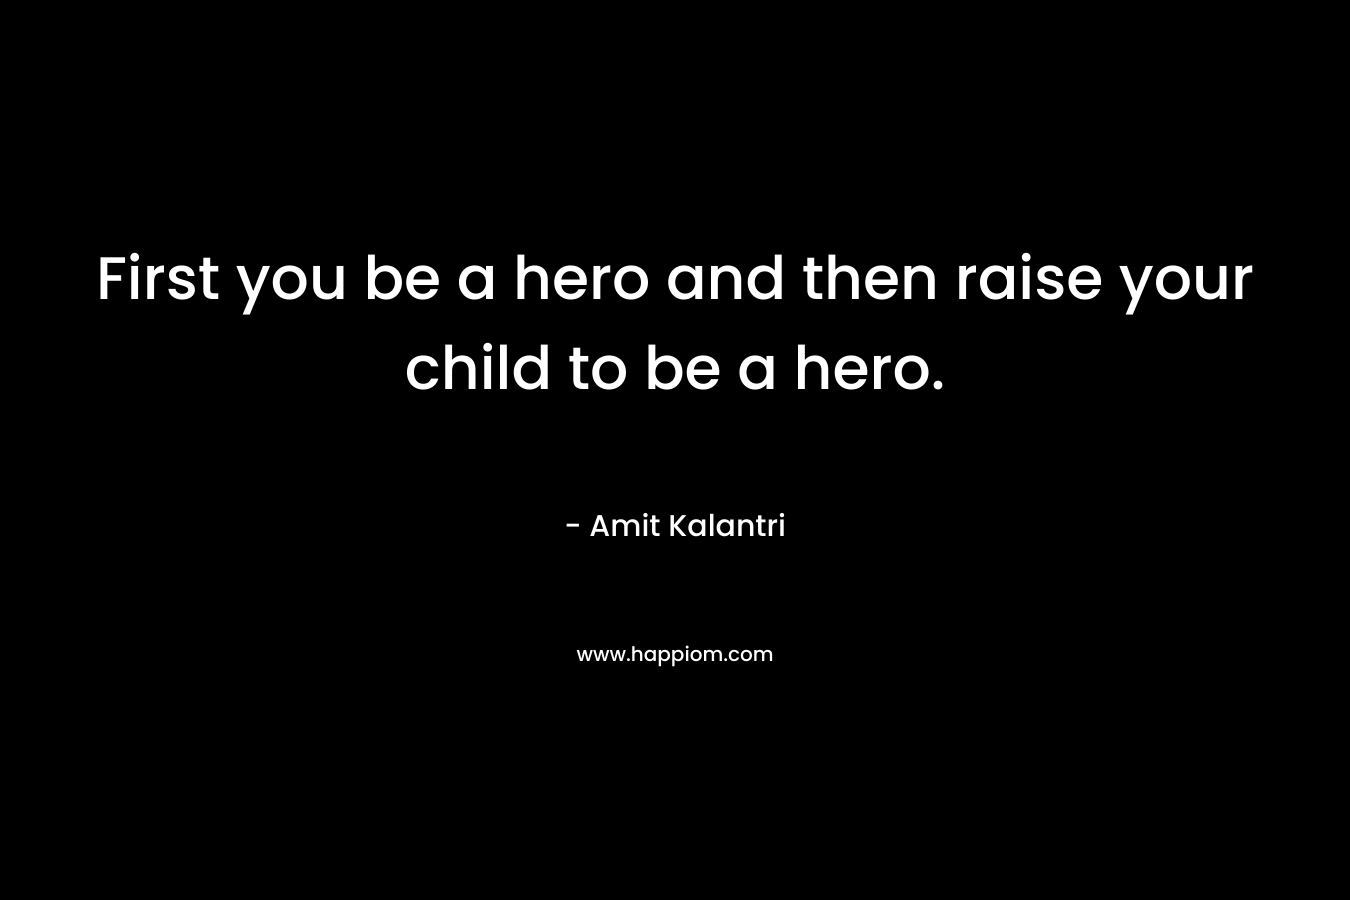 First you be a hero and then raise your child to be a hero.